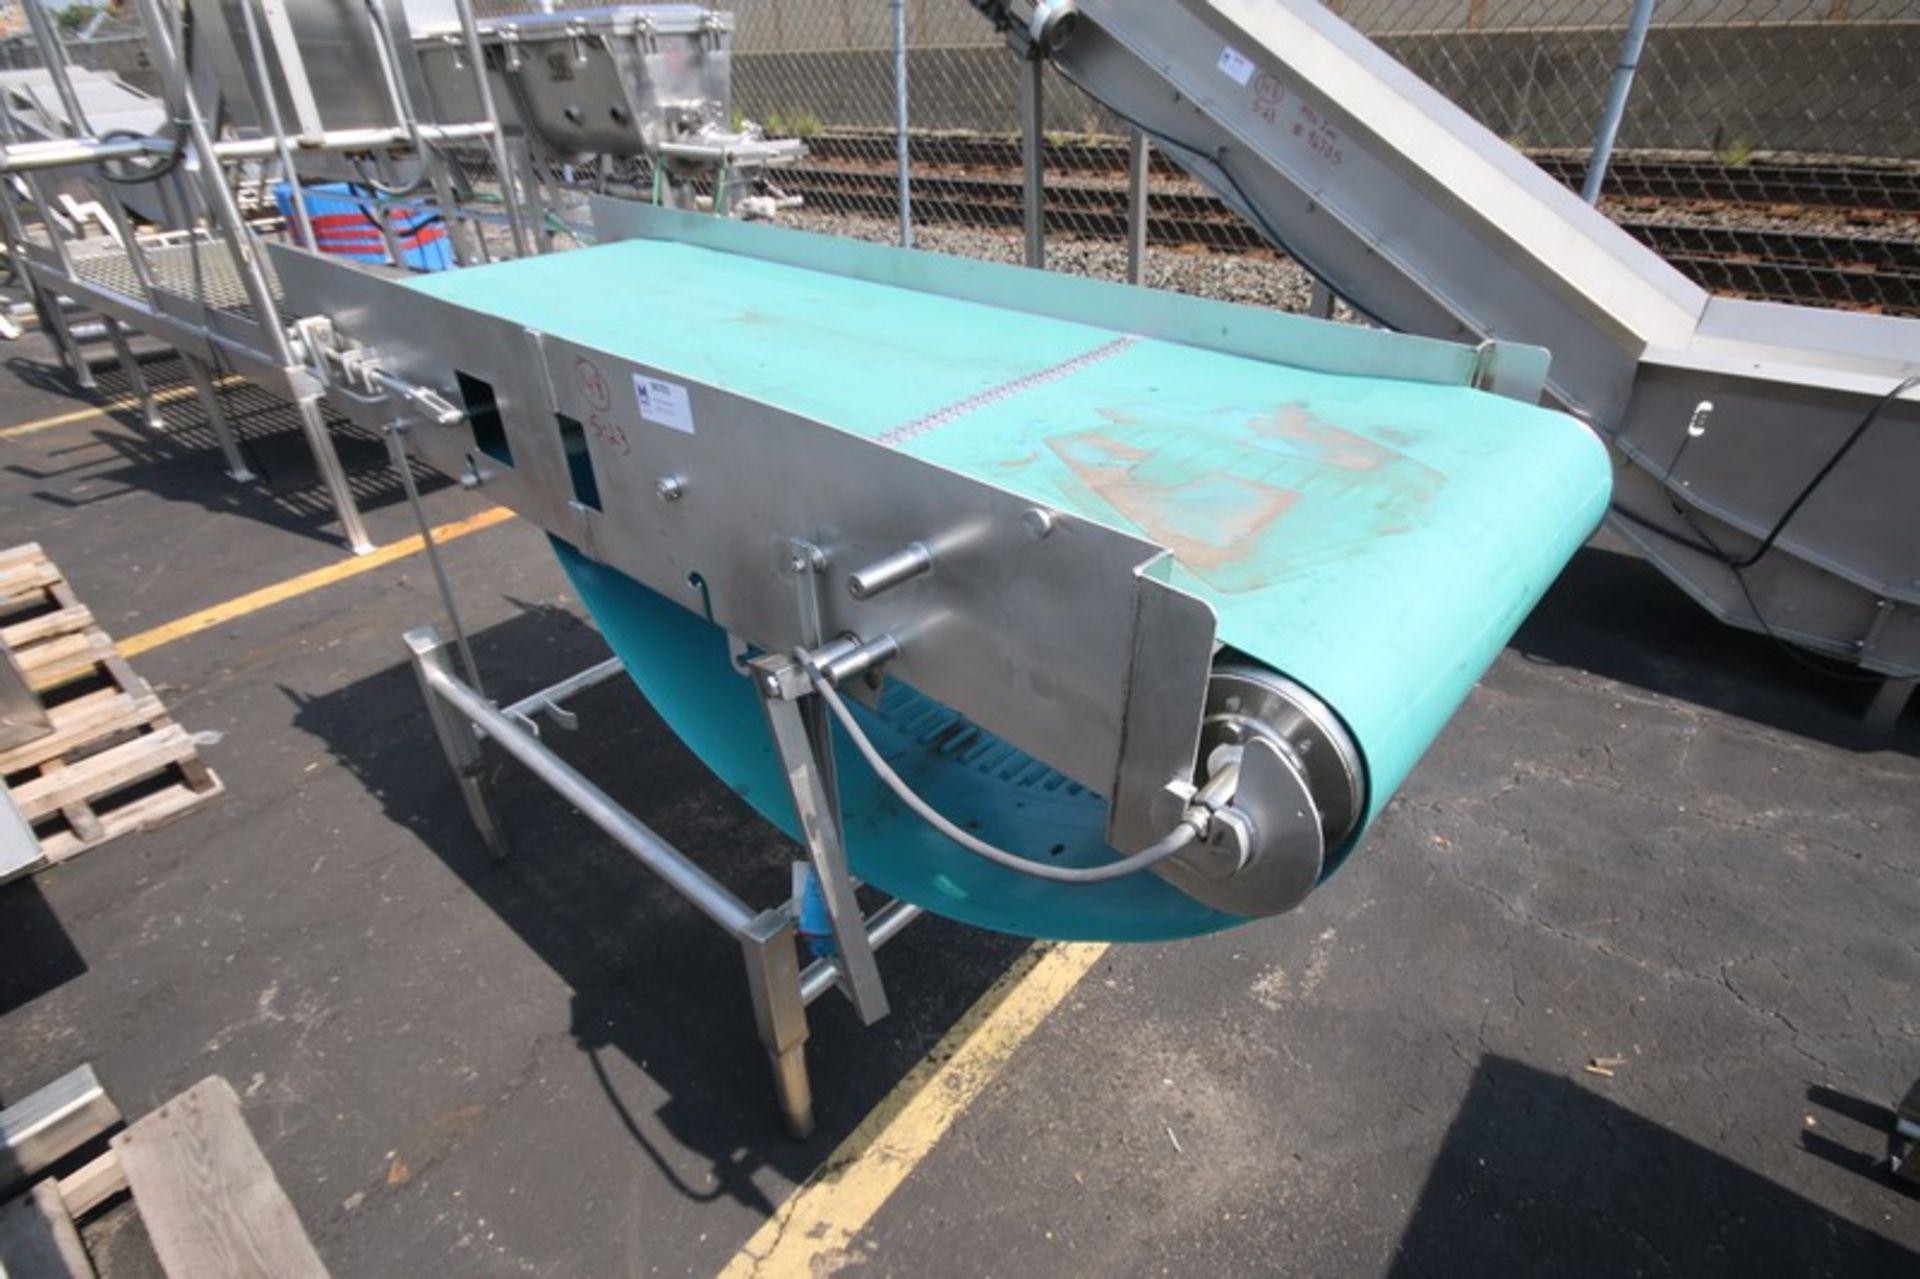 Keenline Aprox. 75" L x 40" H S/S Belt Conveyor, with 24" W Belt, with Drive Roller (INV#96701) (